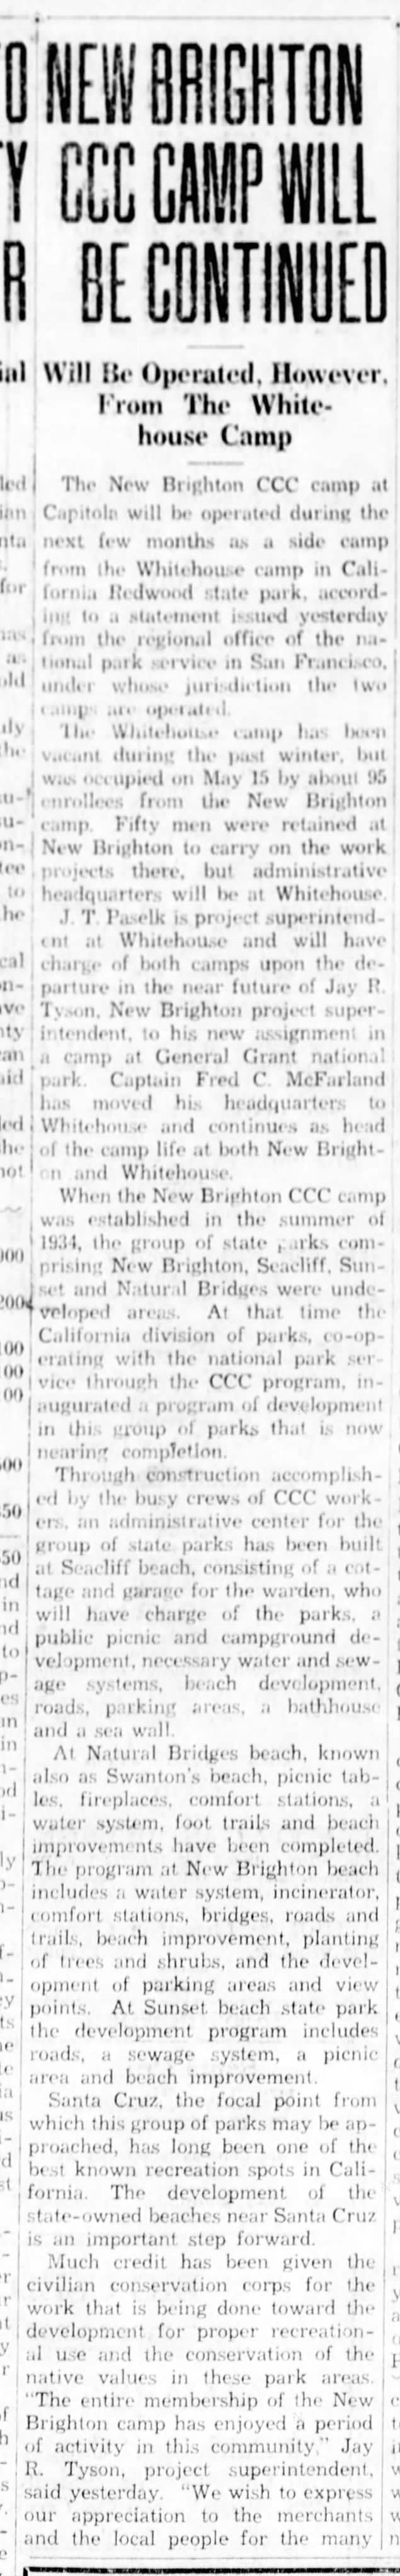 Sentinel, 26 May 1937, Page 7, Col 5